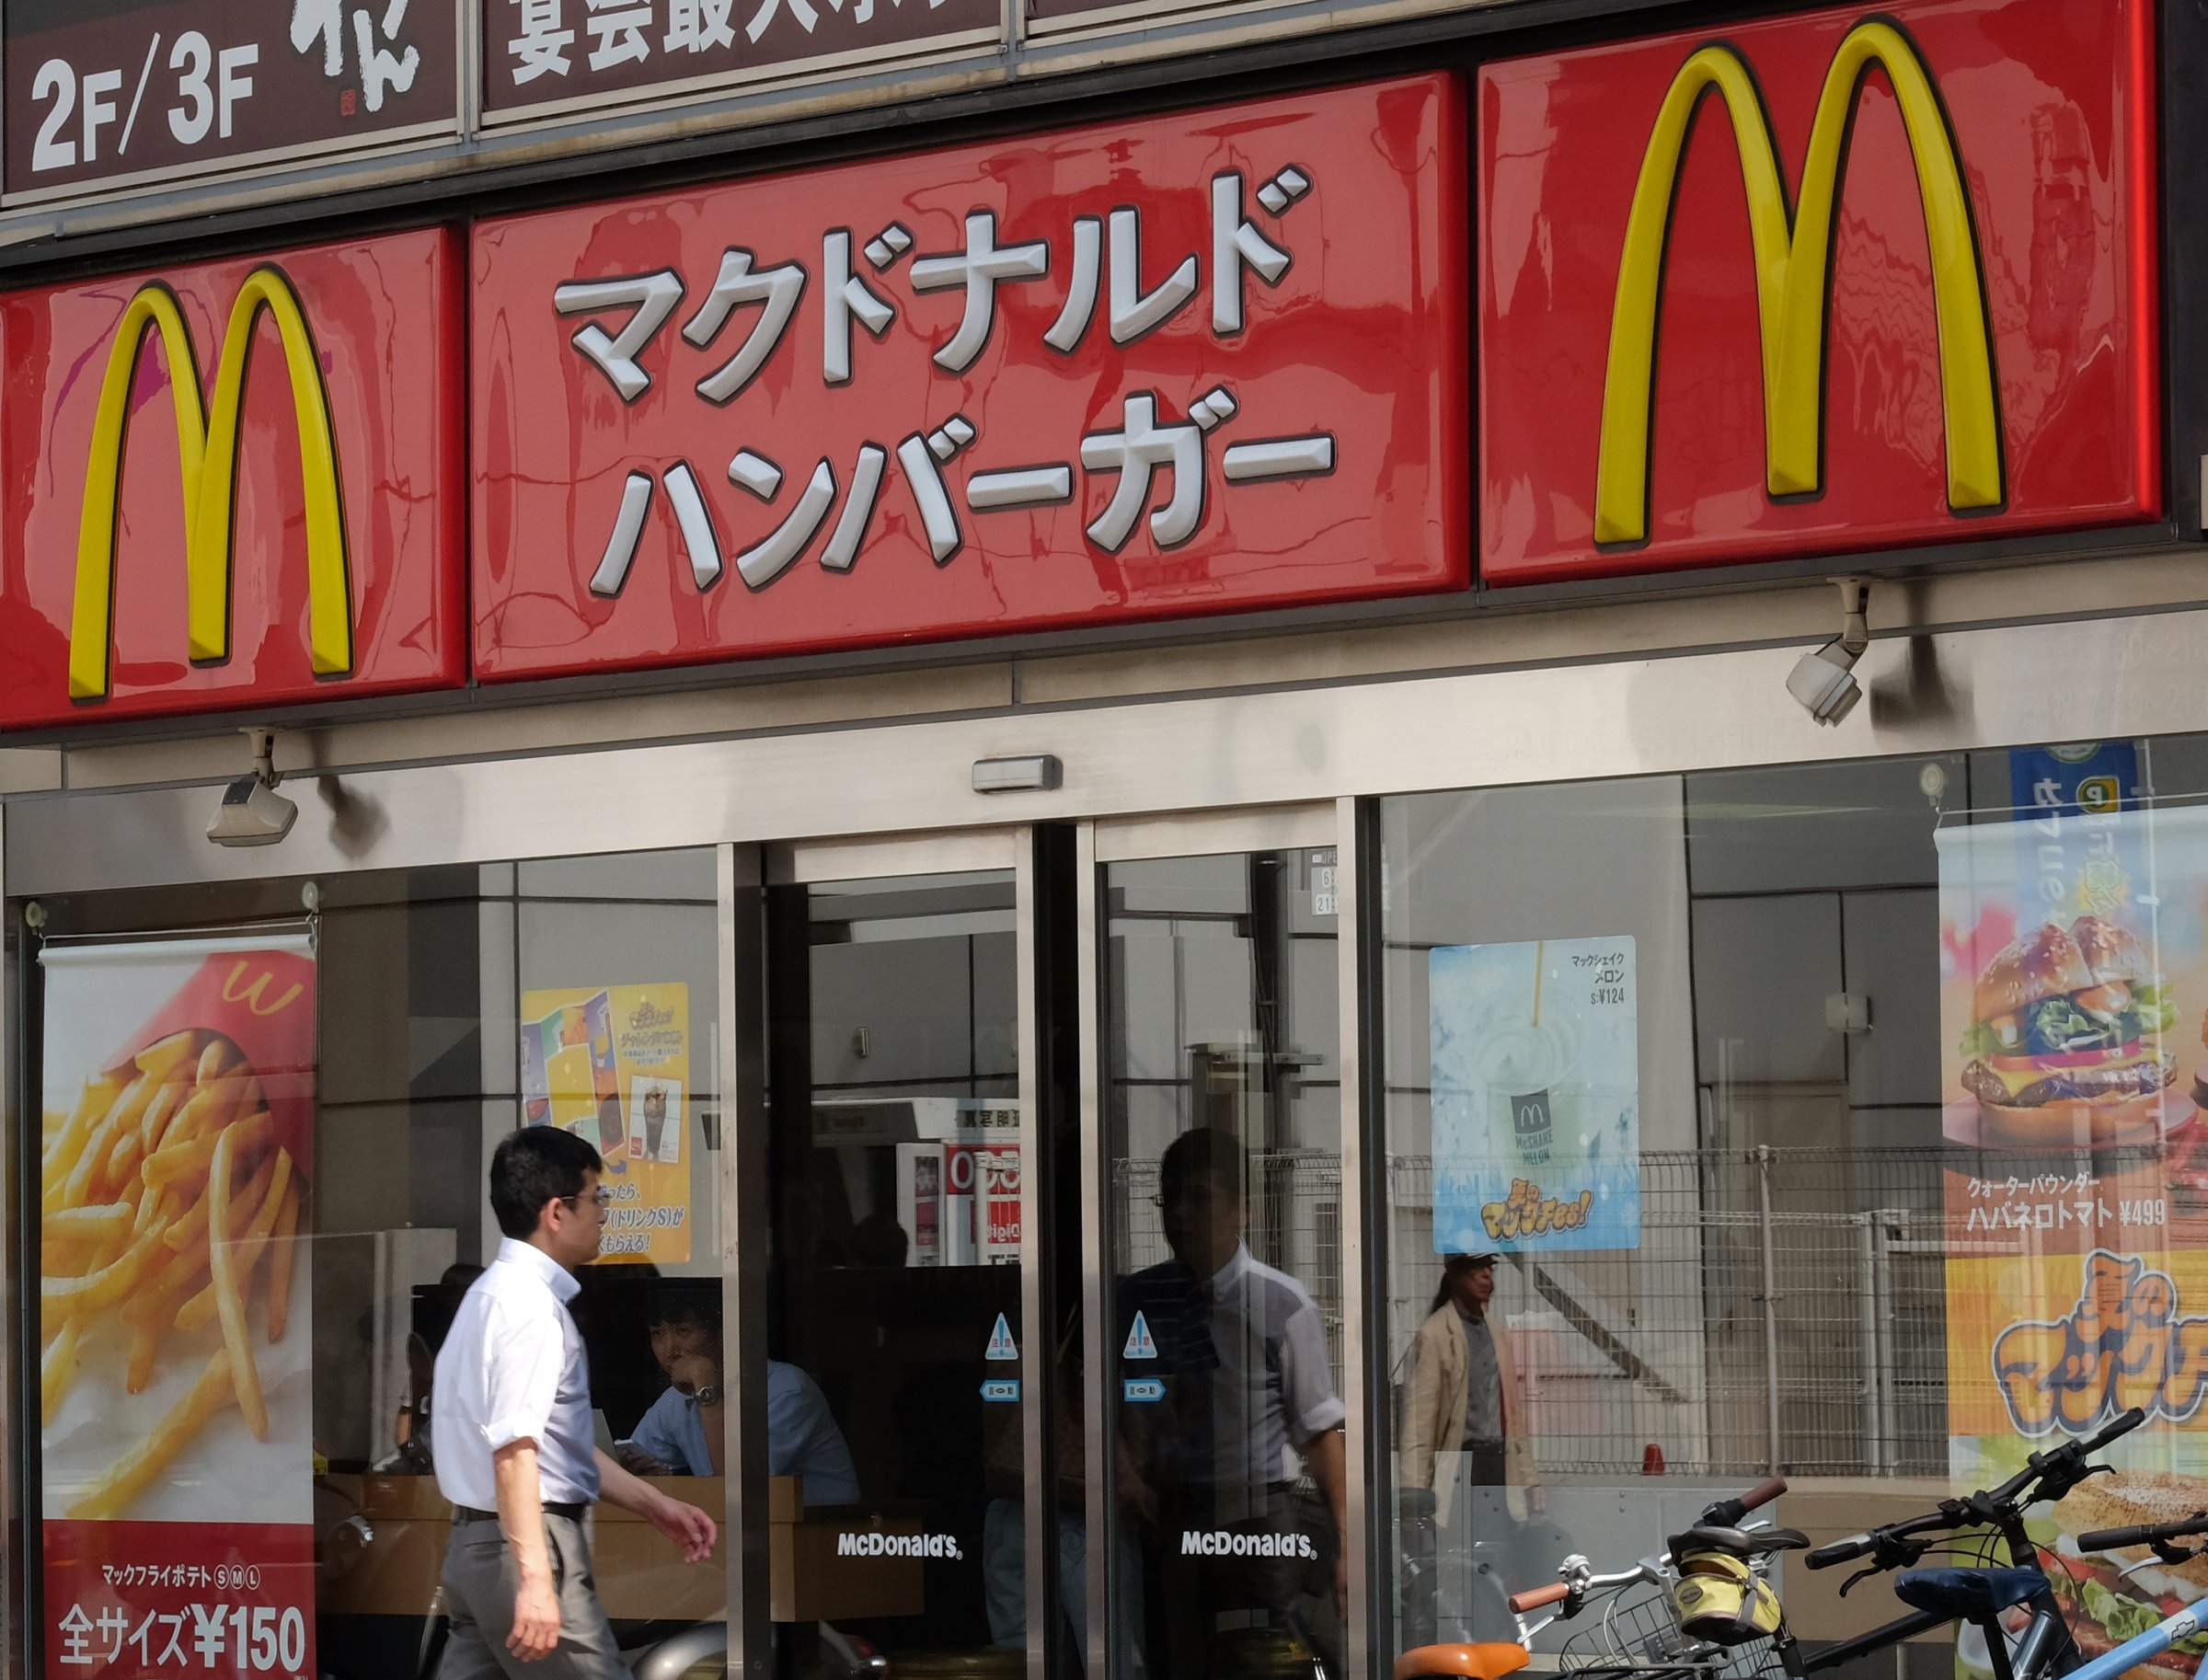 Views Of FamilyMart Convenience Store And McDonald's Restaurant As Retailers Halt Chicken Sales From China Supplier